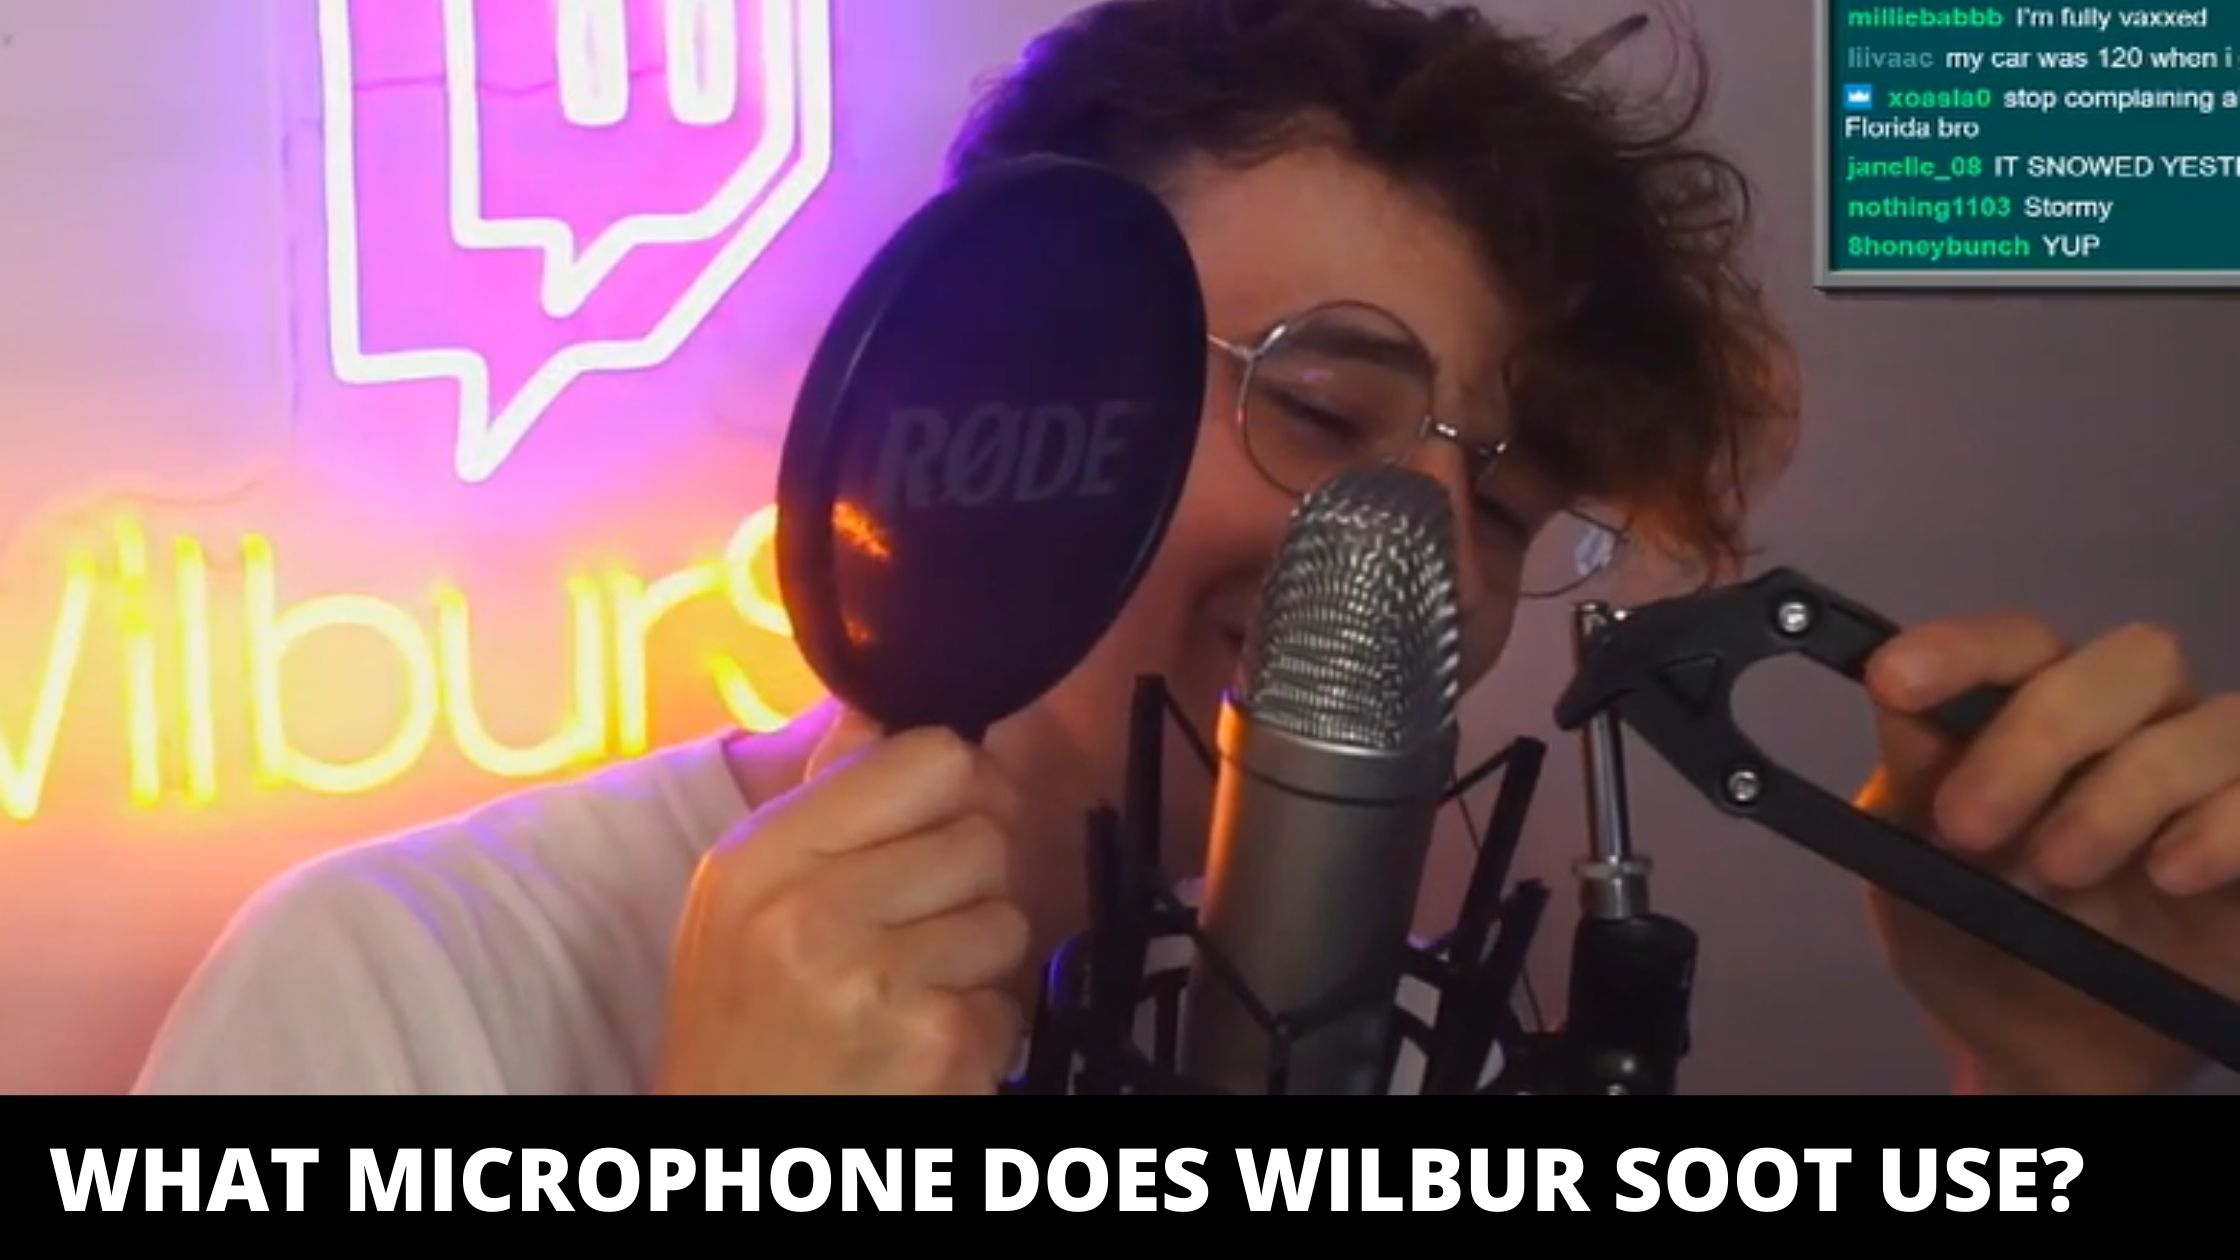 What microphone does Wilbur Soot use?: Rode NT2-A Condenser